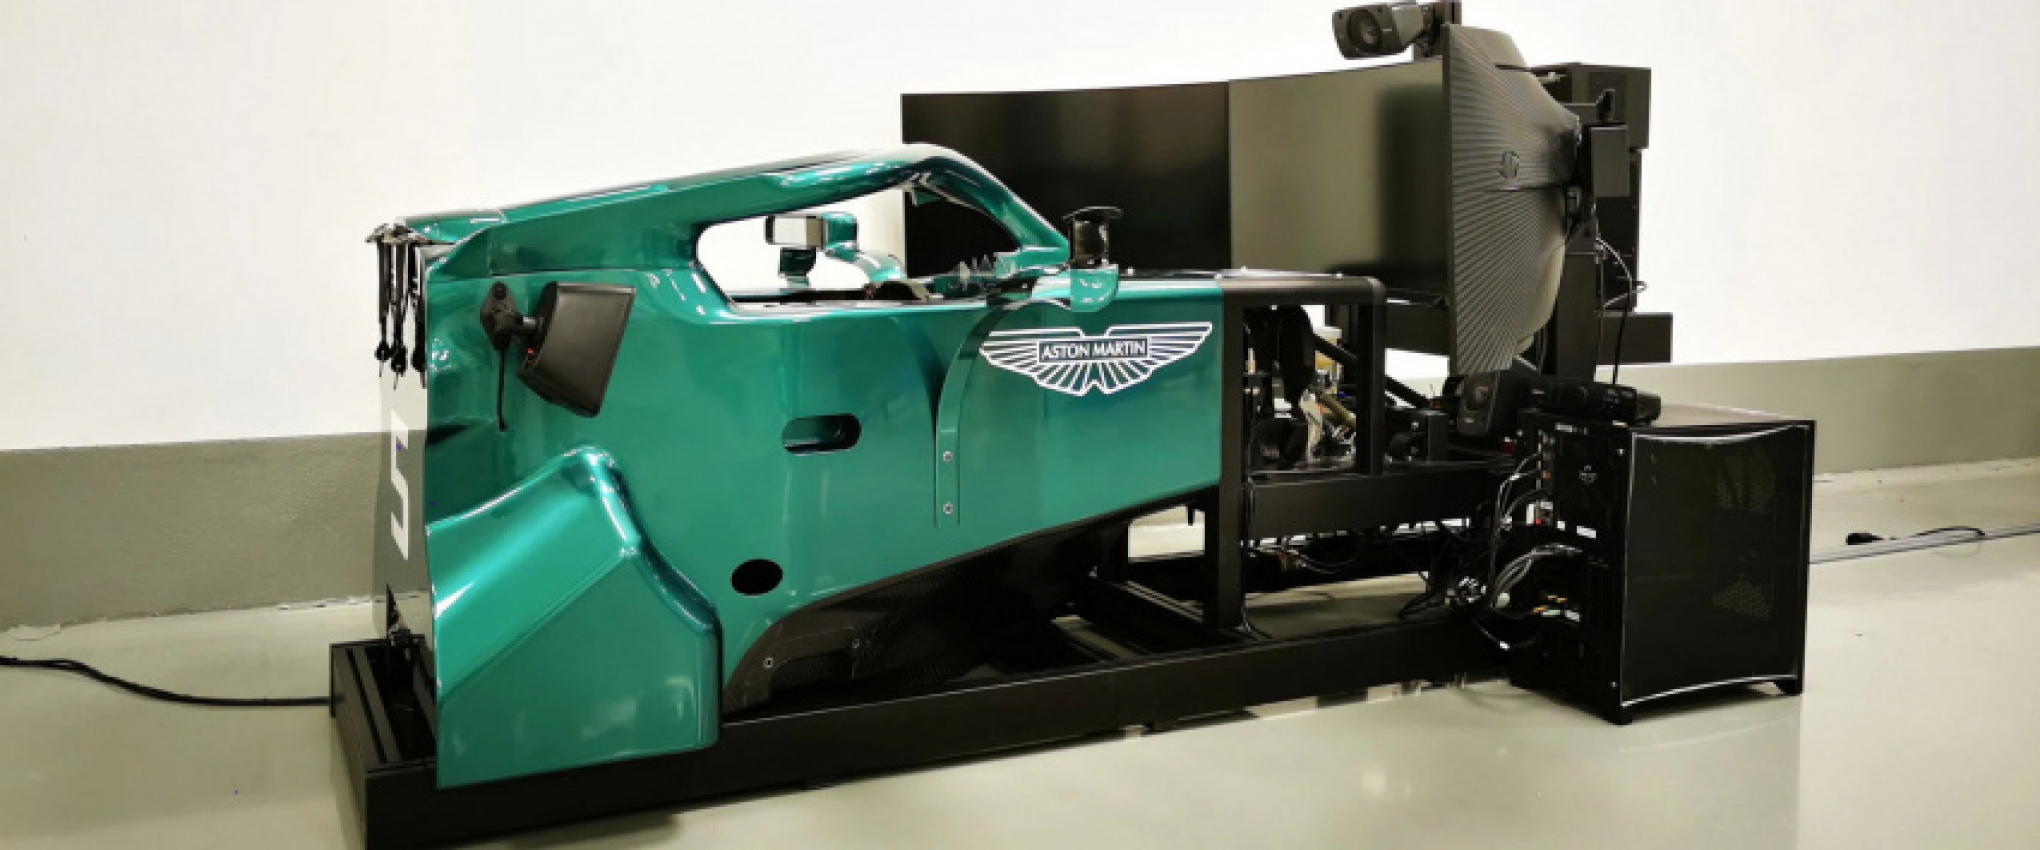 autos, cars, news, aston martin, games, motorsports, racing, sebastian vettel’s new home racing sim rig is made from an actual f1 car